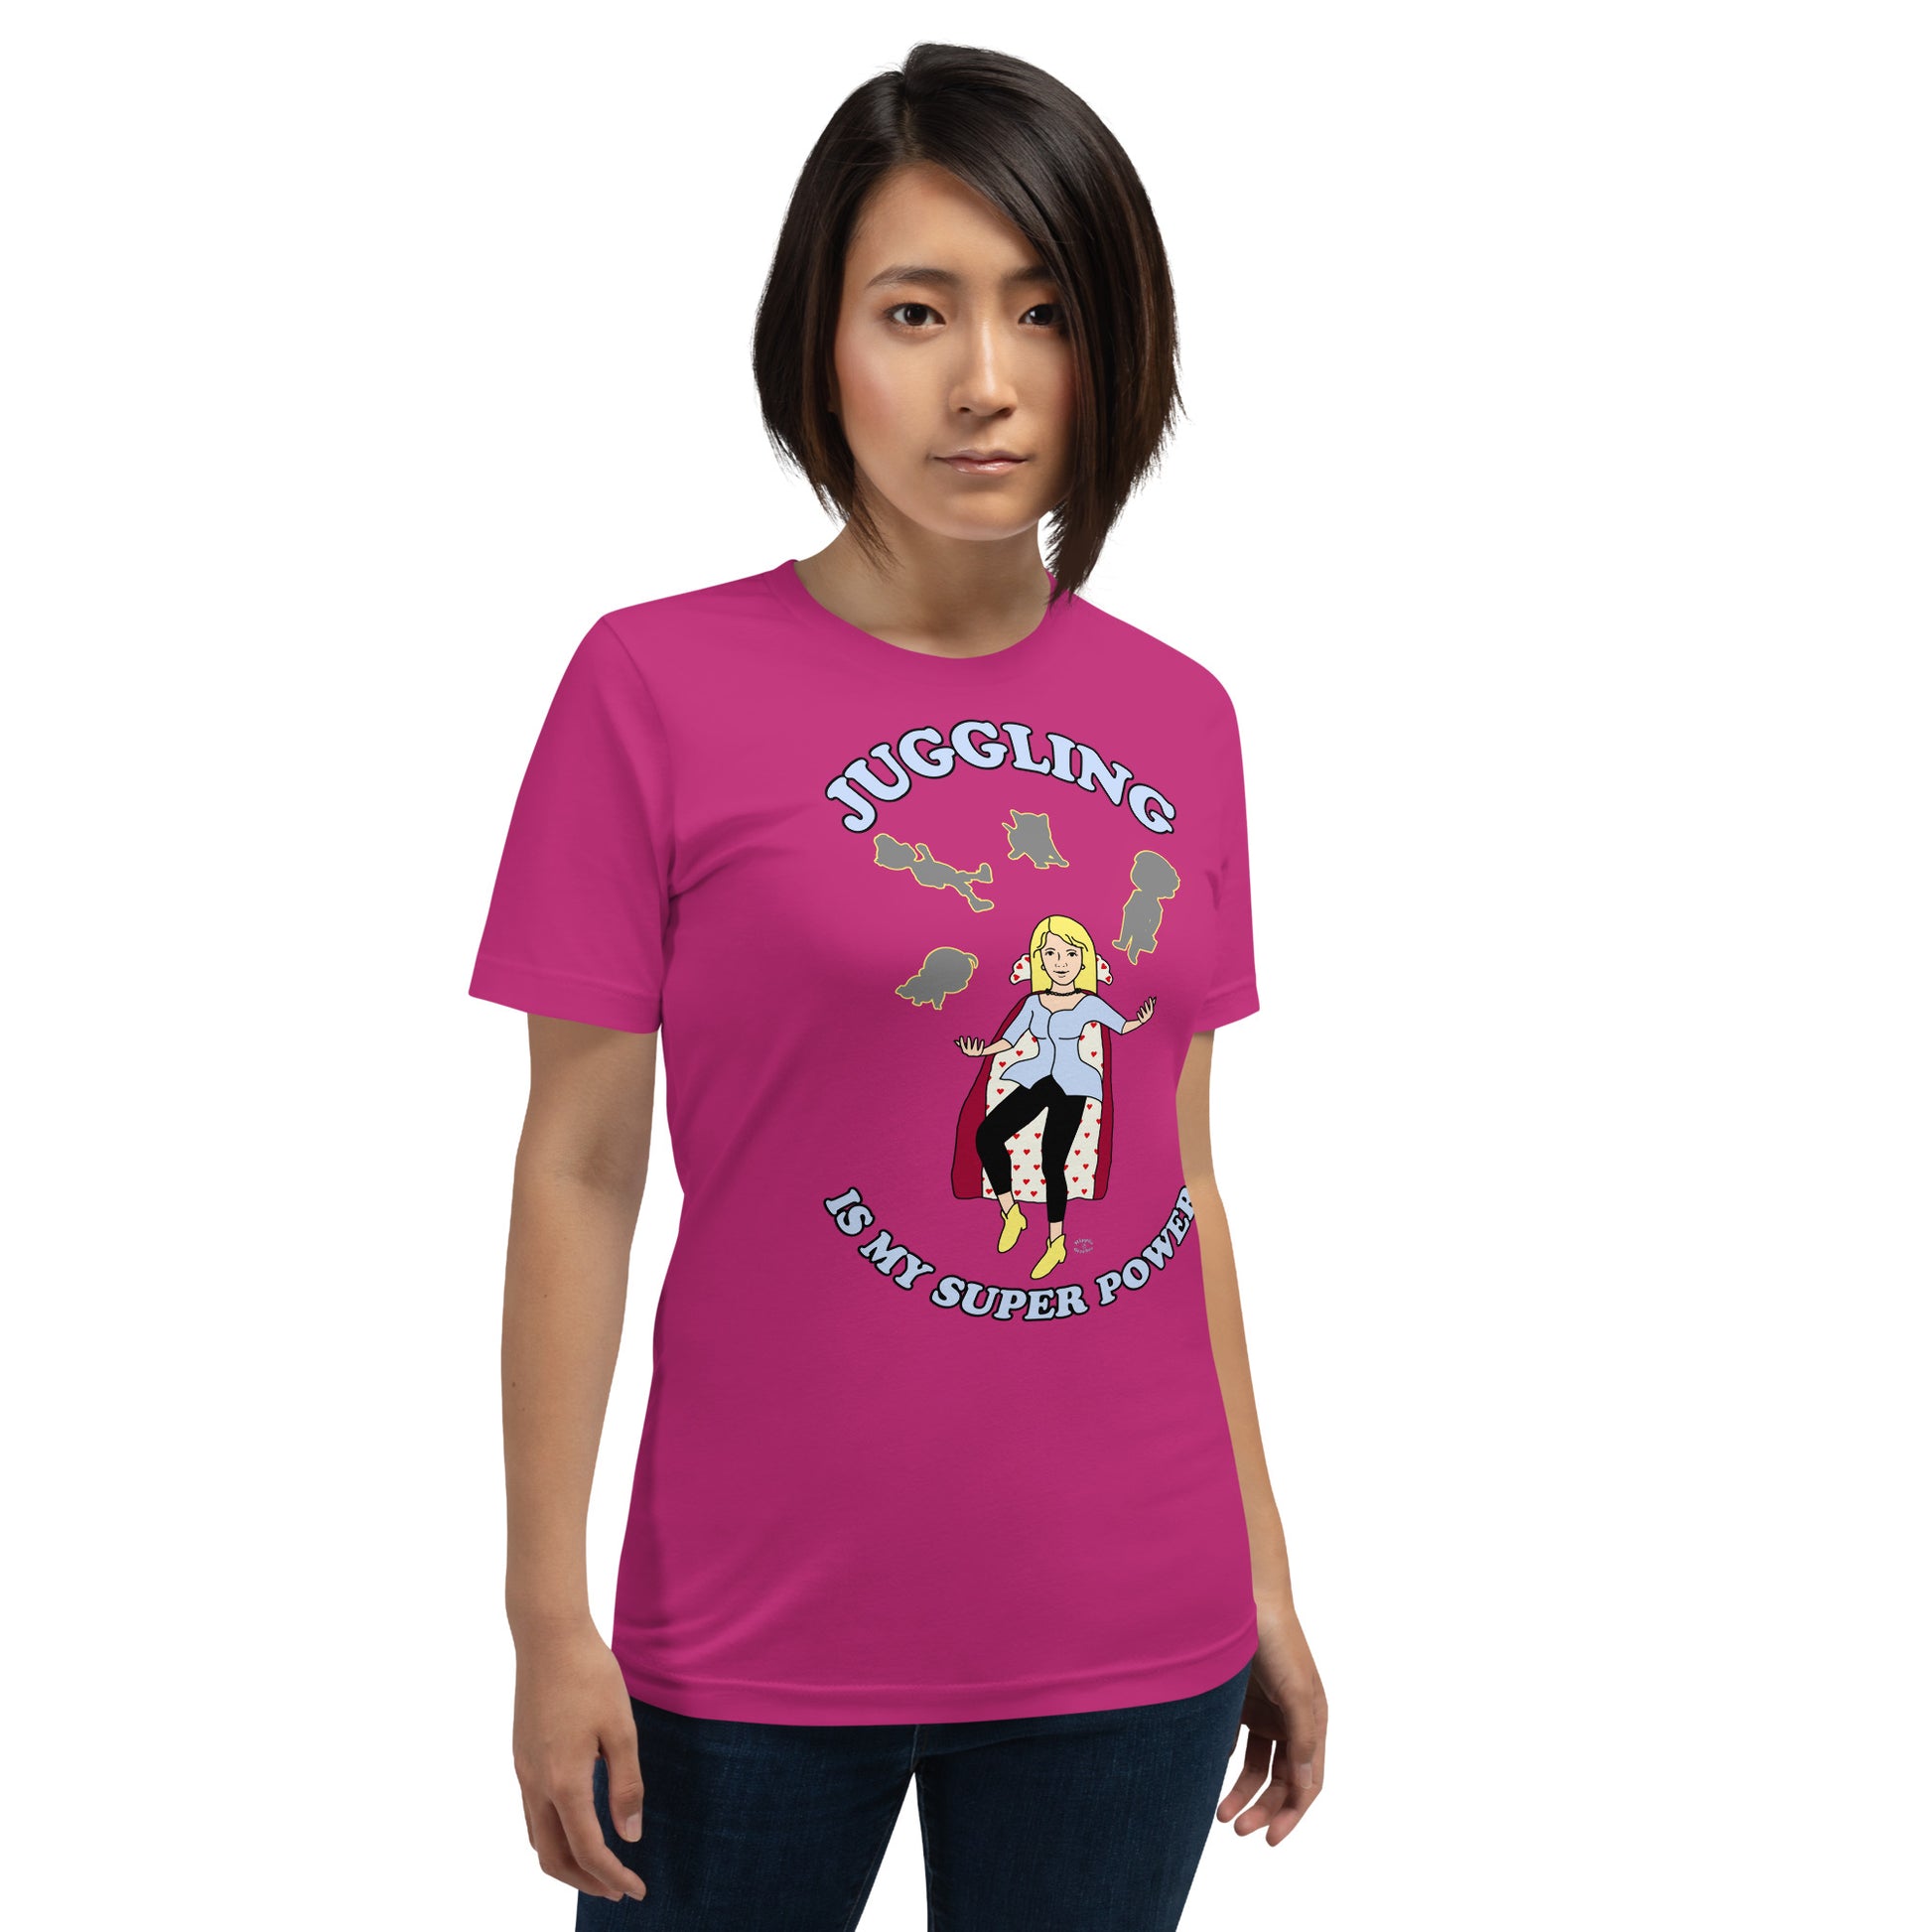 A women wearing a unisex short sleeve tshirt which has on the front a cartoon women in a cape juggling her family like a jester and the text Juggling Is My Super Power - front - berry pink